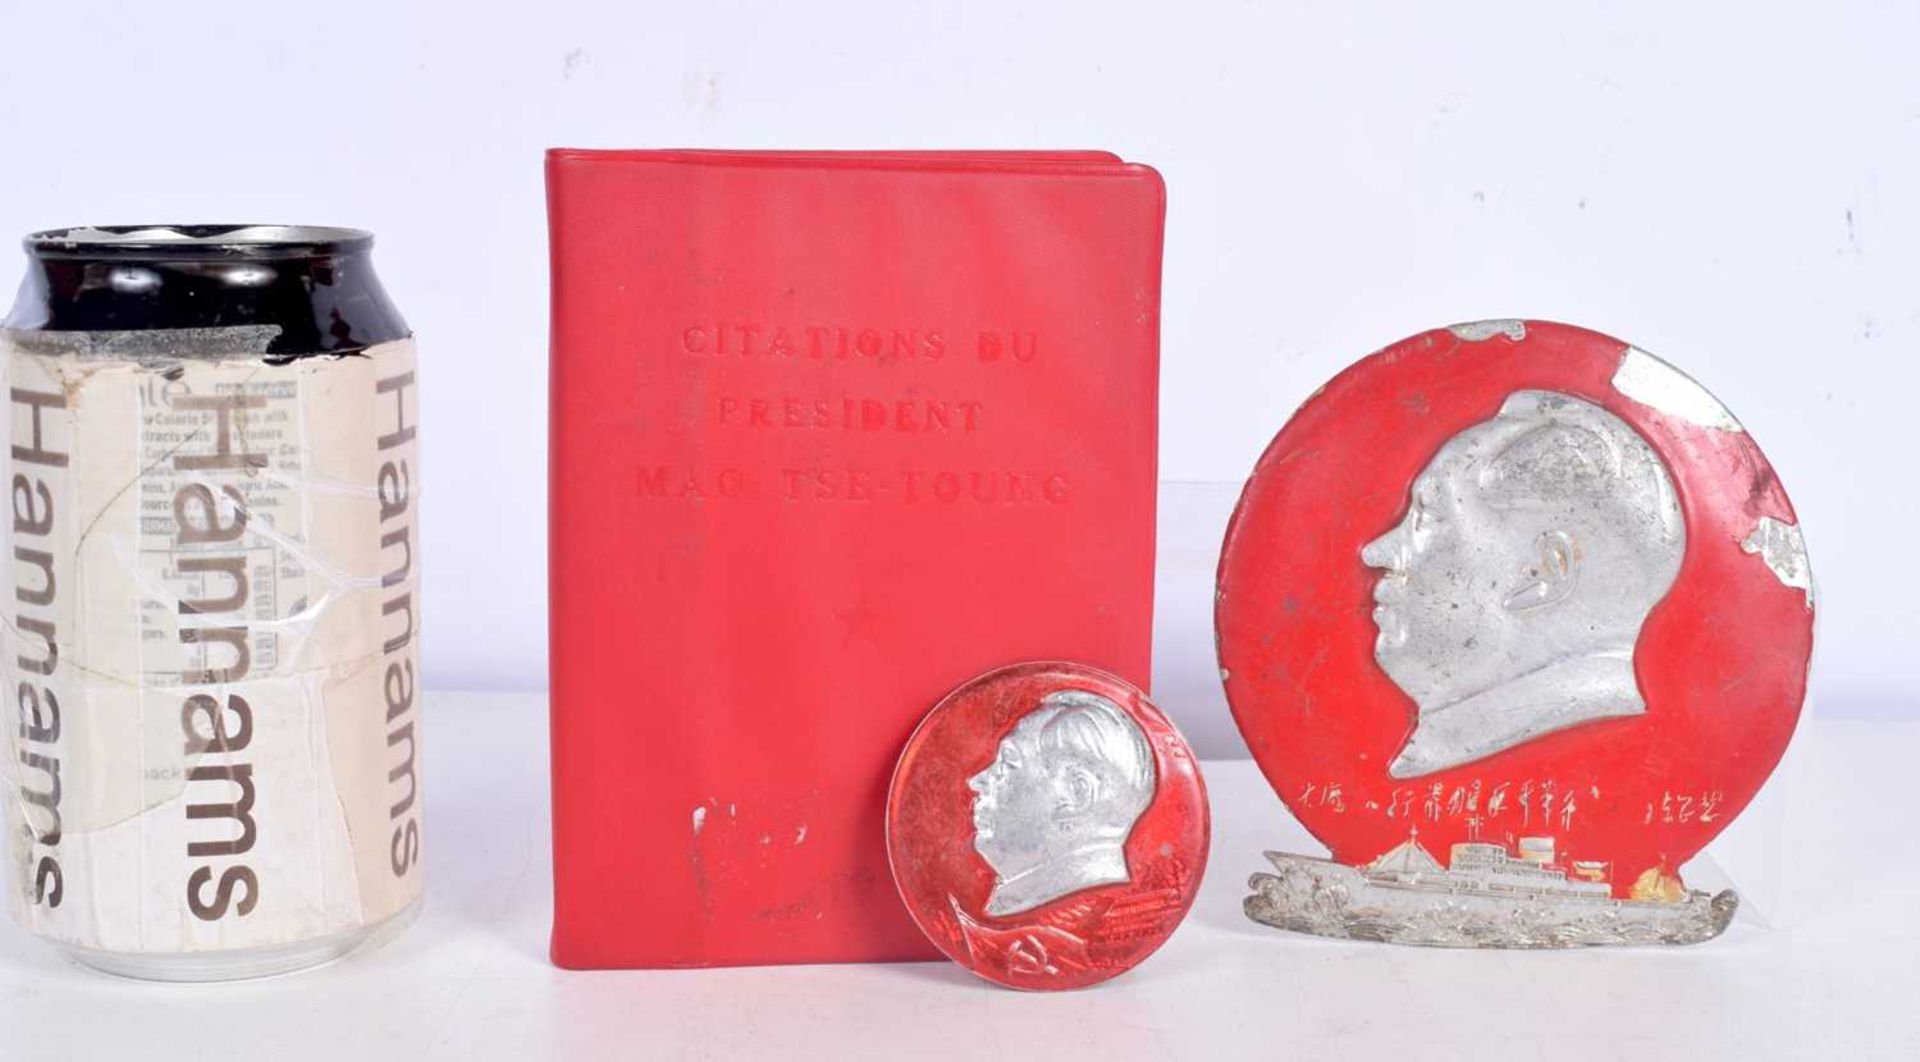 A French copy of The Citations of President Mao Tse Toung together with 2 enamelled metal plaques (